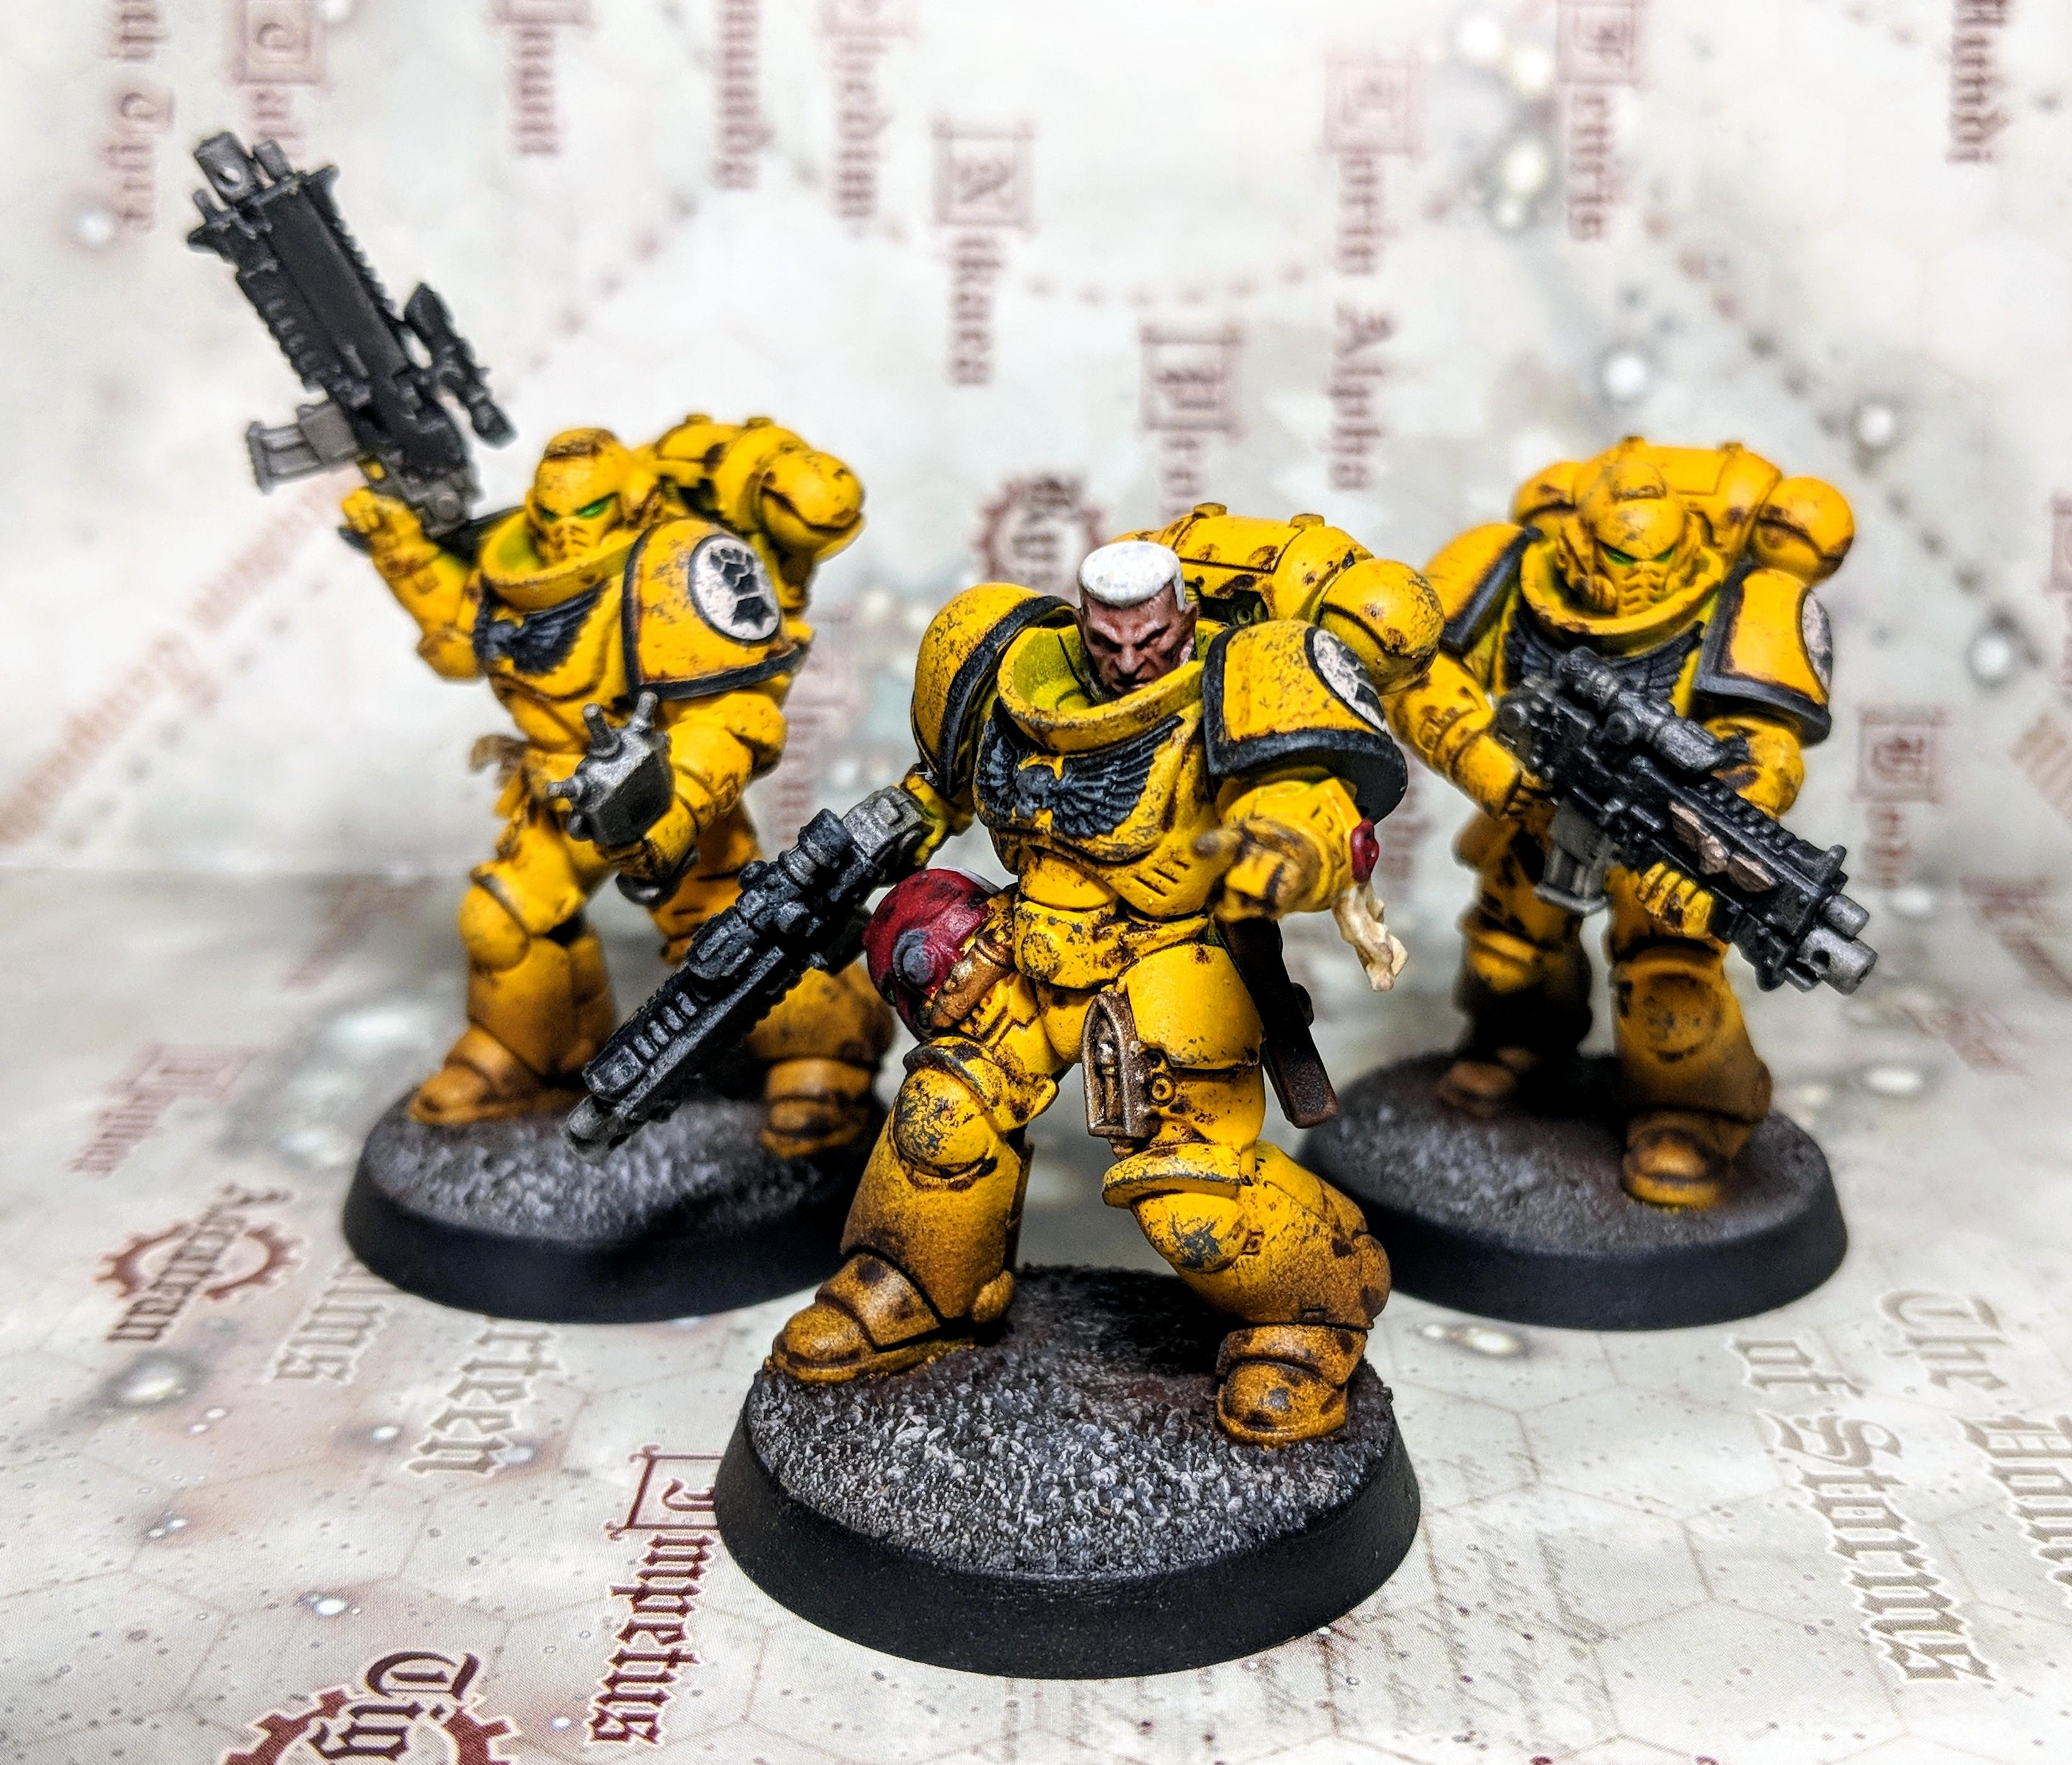 Imperial Fists, Primaris, Warhammer Conquest